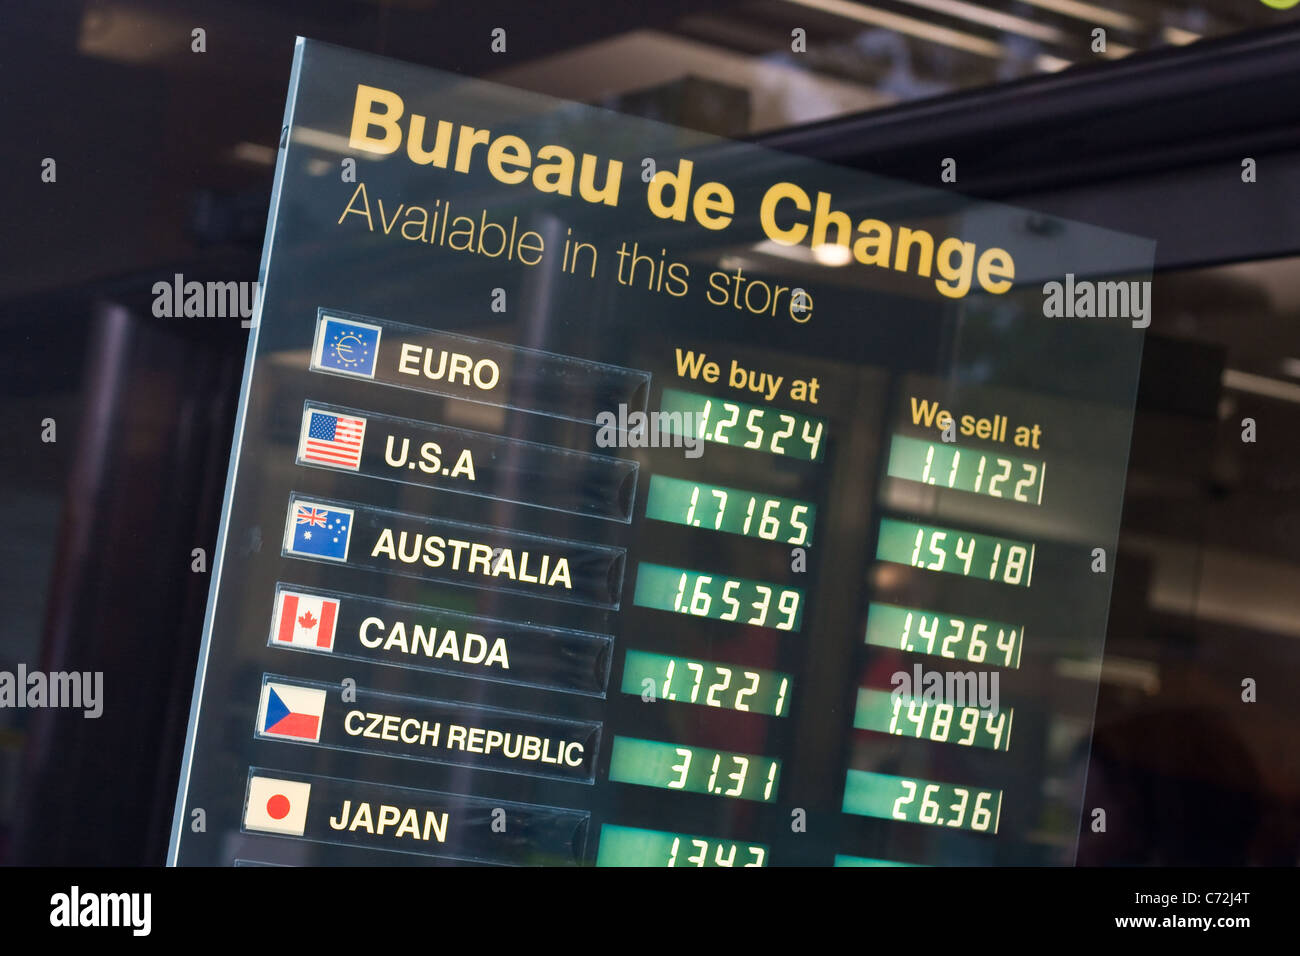 Exchange rates advertised at a Bureau de Change in the UK Stock Photo